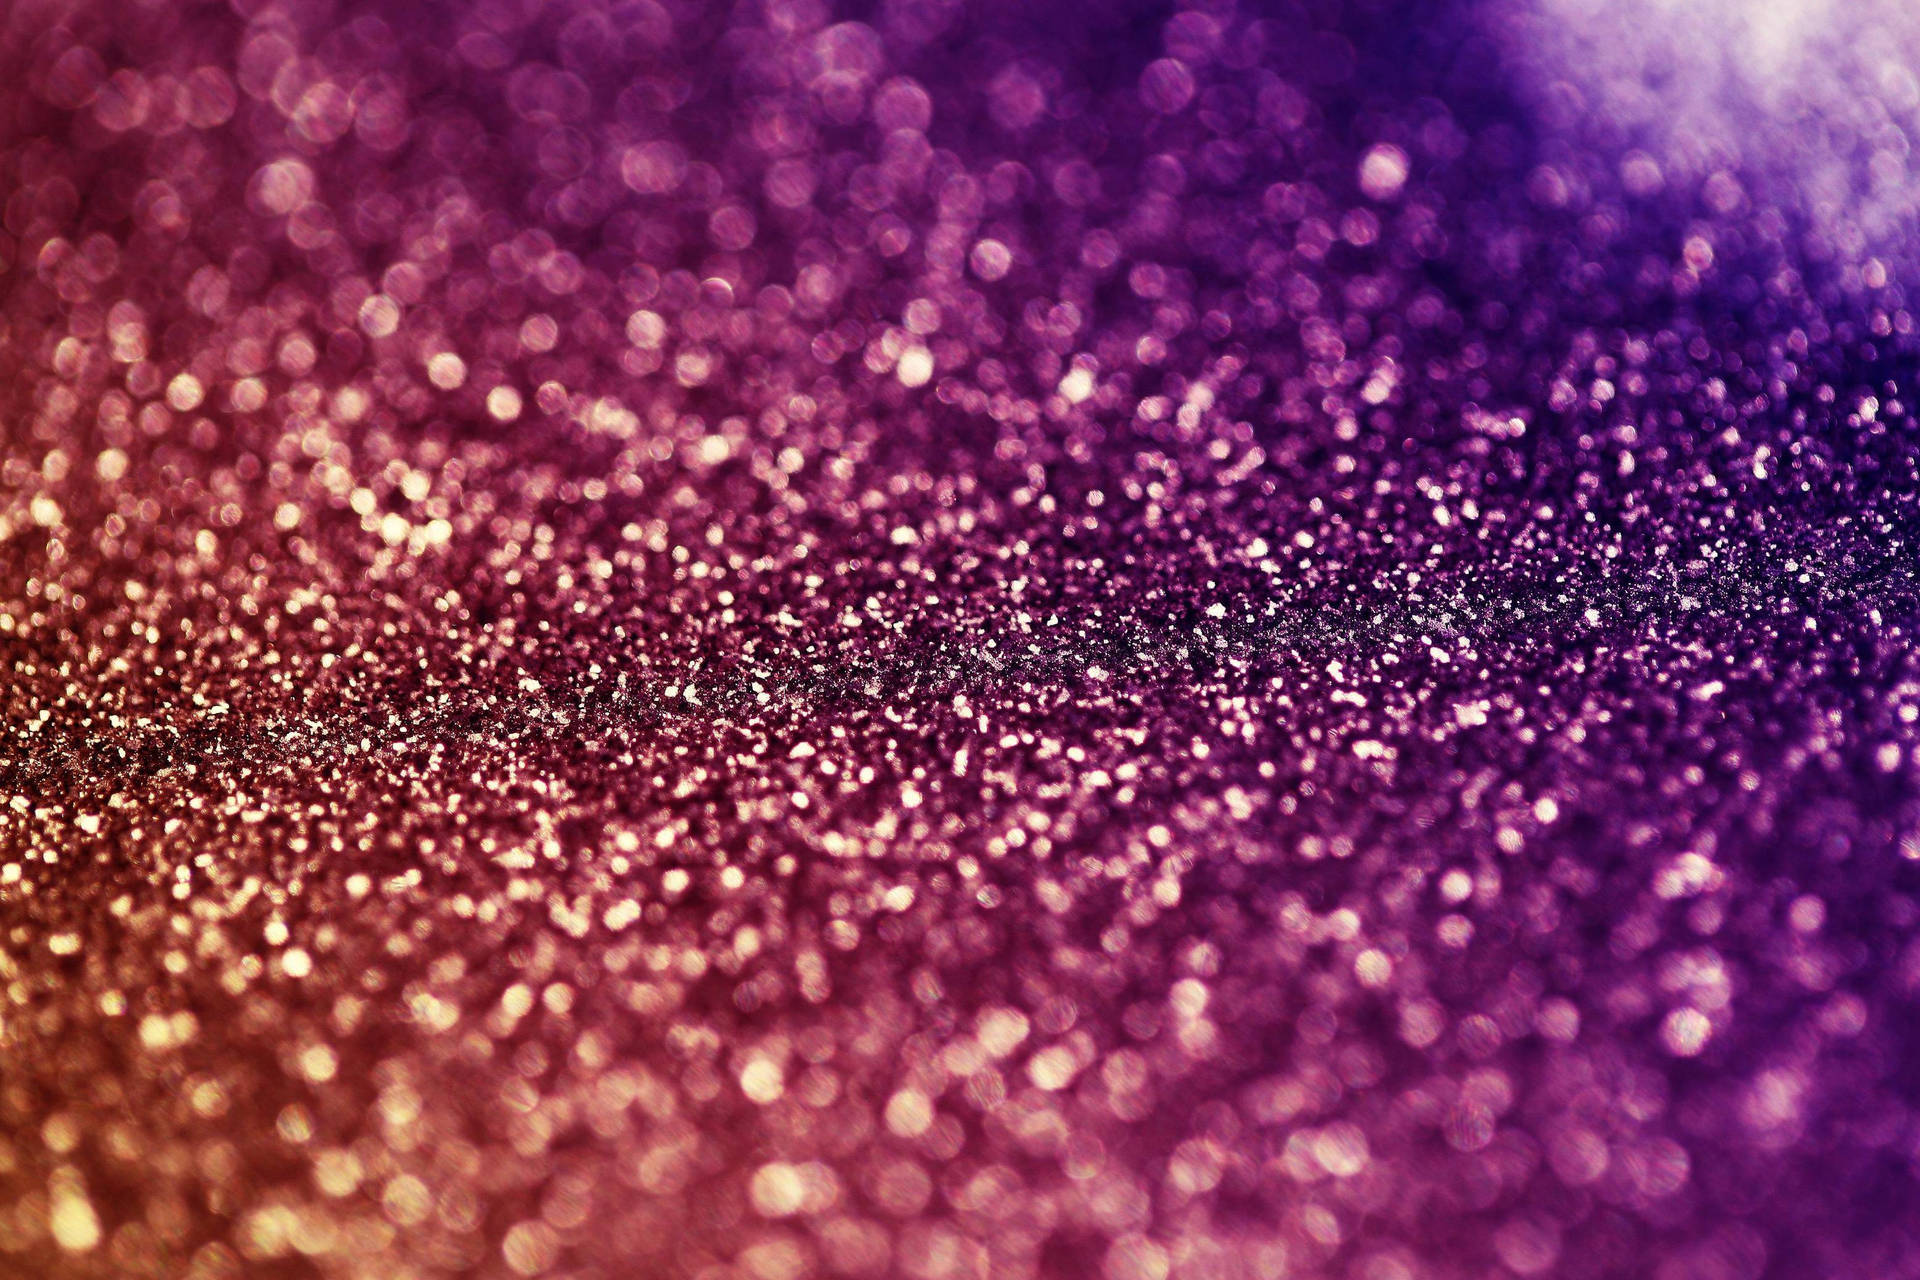 sparkly pink ombre wallpaper